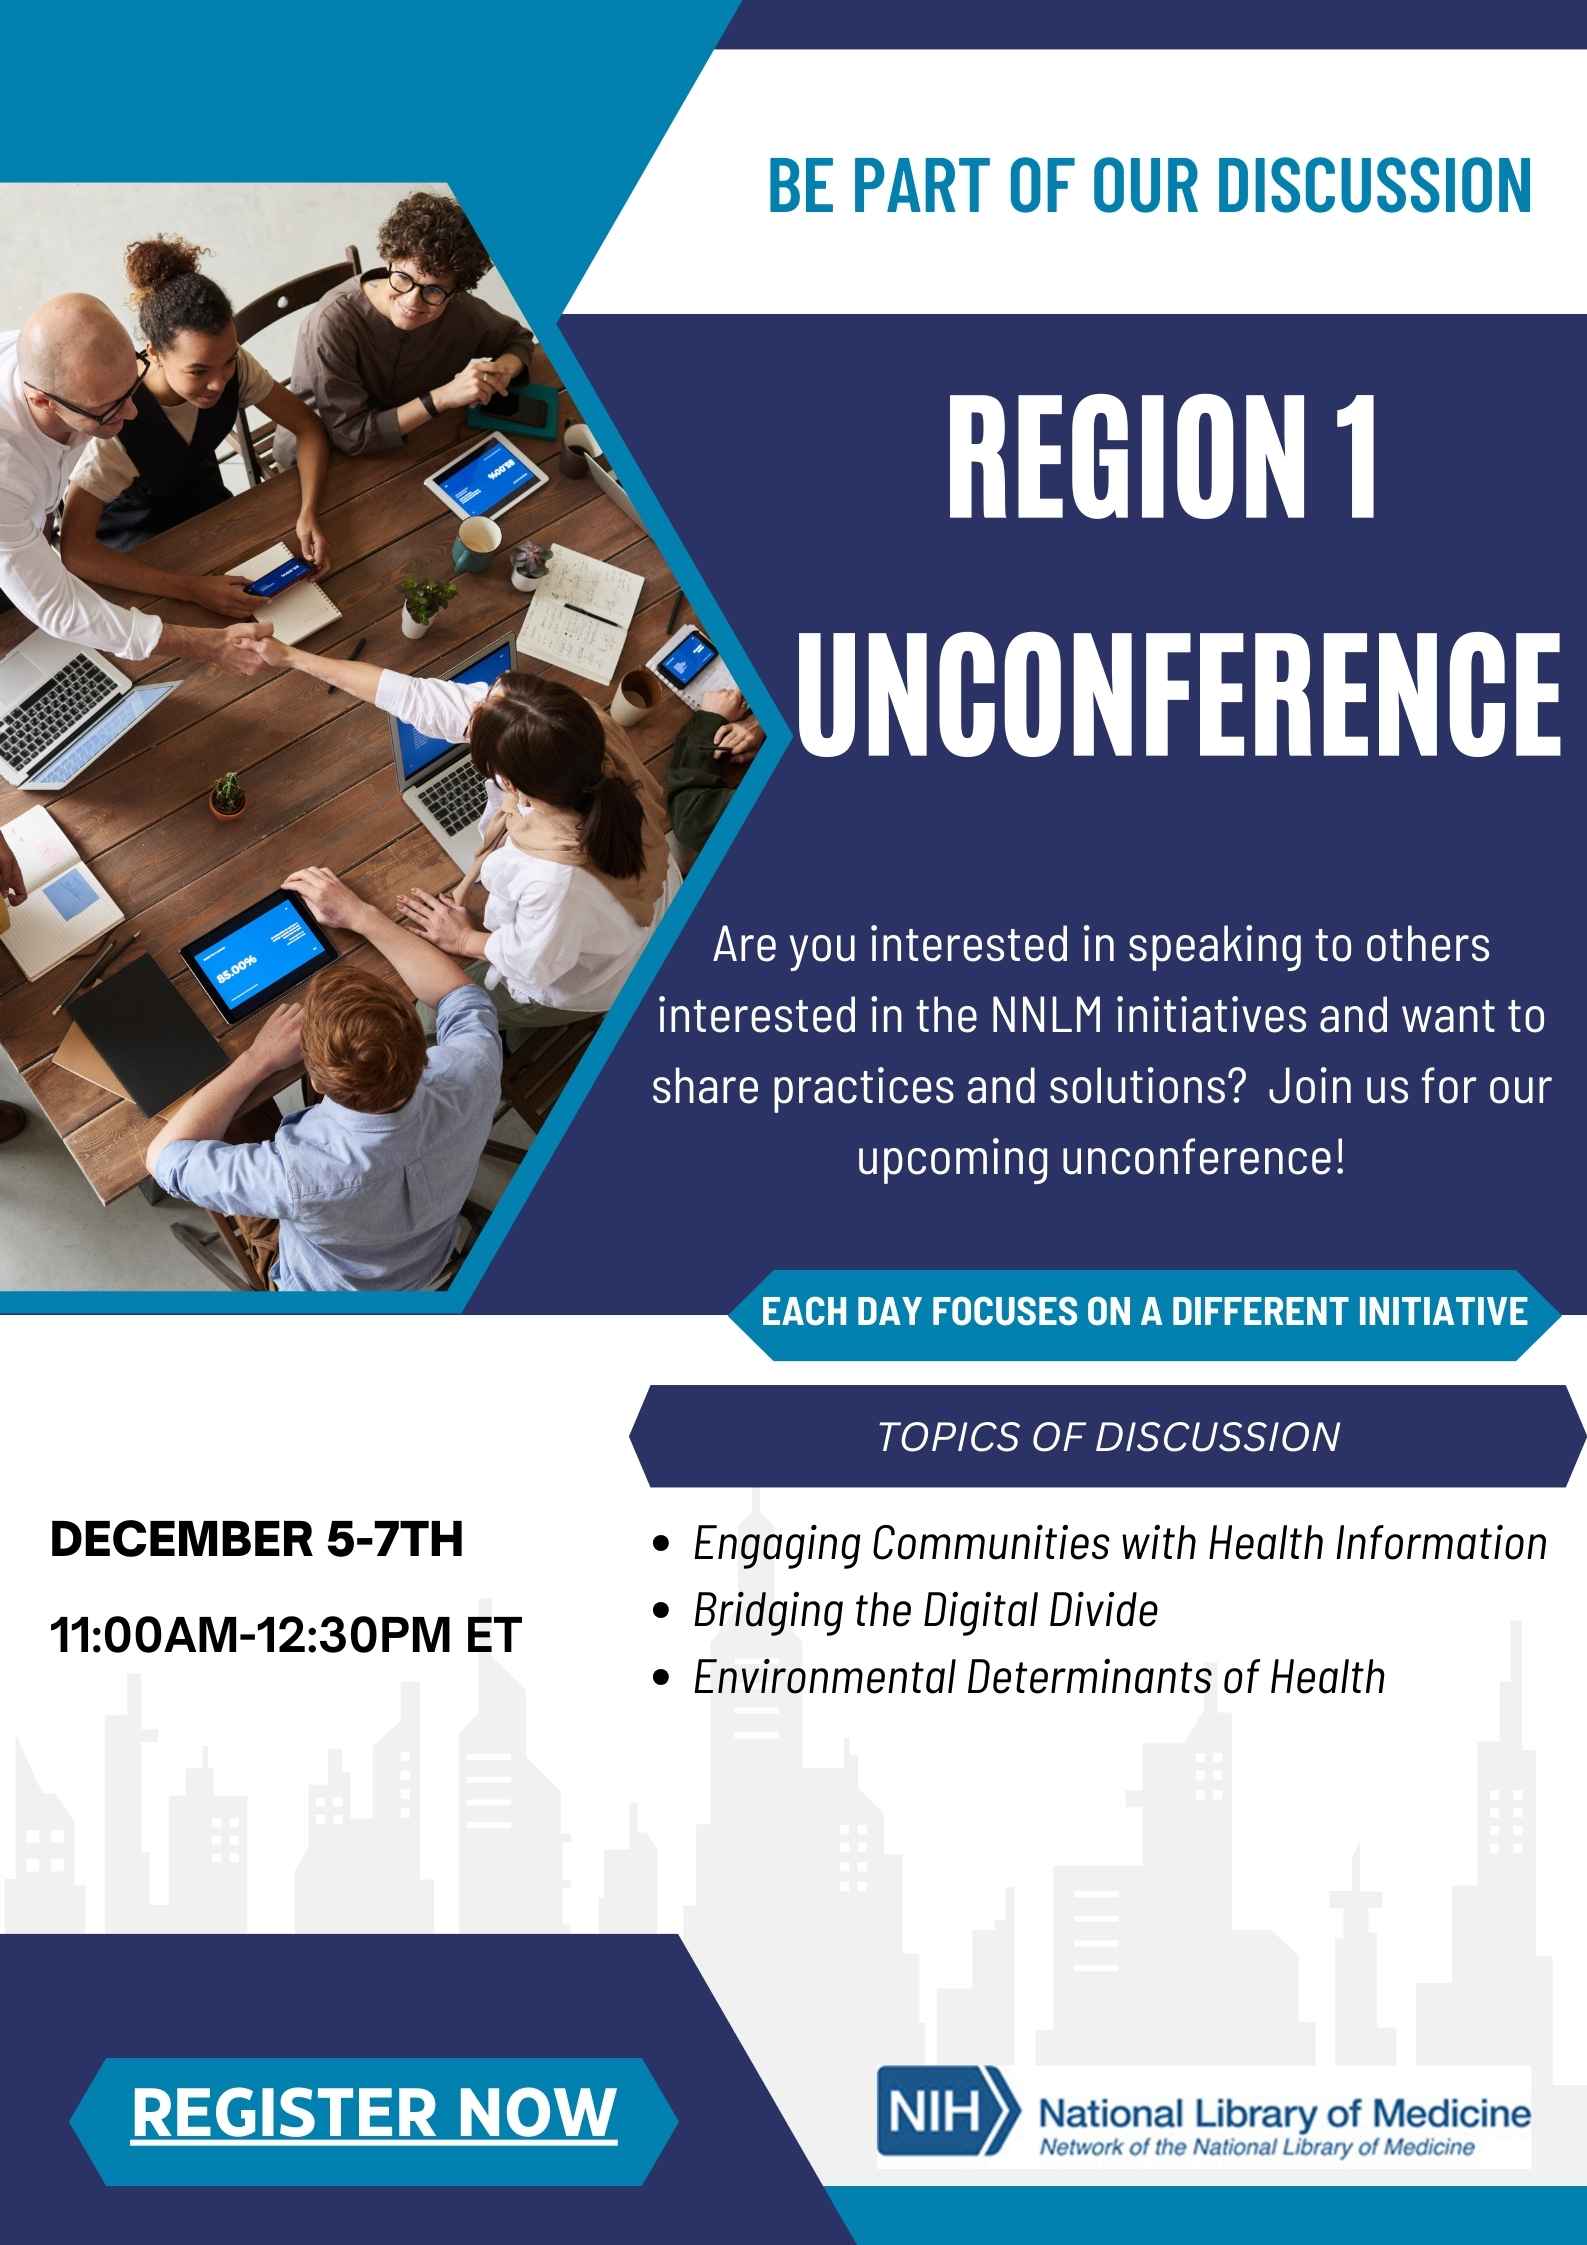 Flyer for Region 1 Unconference date December 5 through 7, 11AM to 12:30PM with dark blue background with a picture of a group of people meeting and using laptops